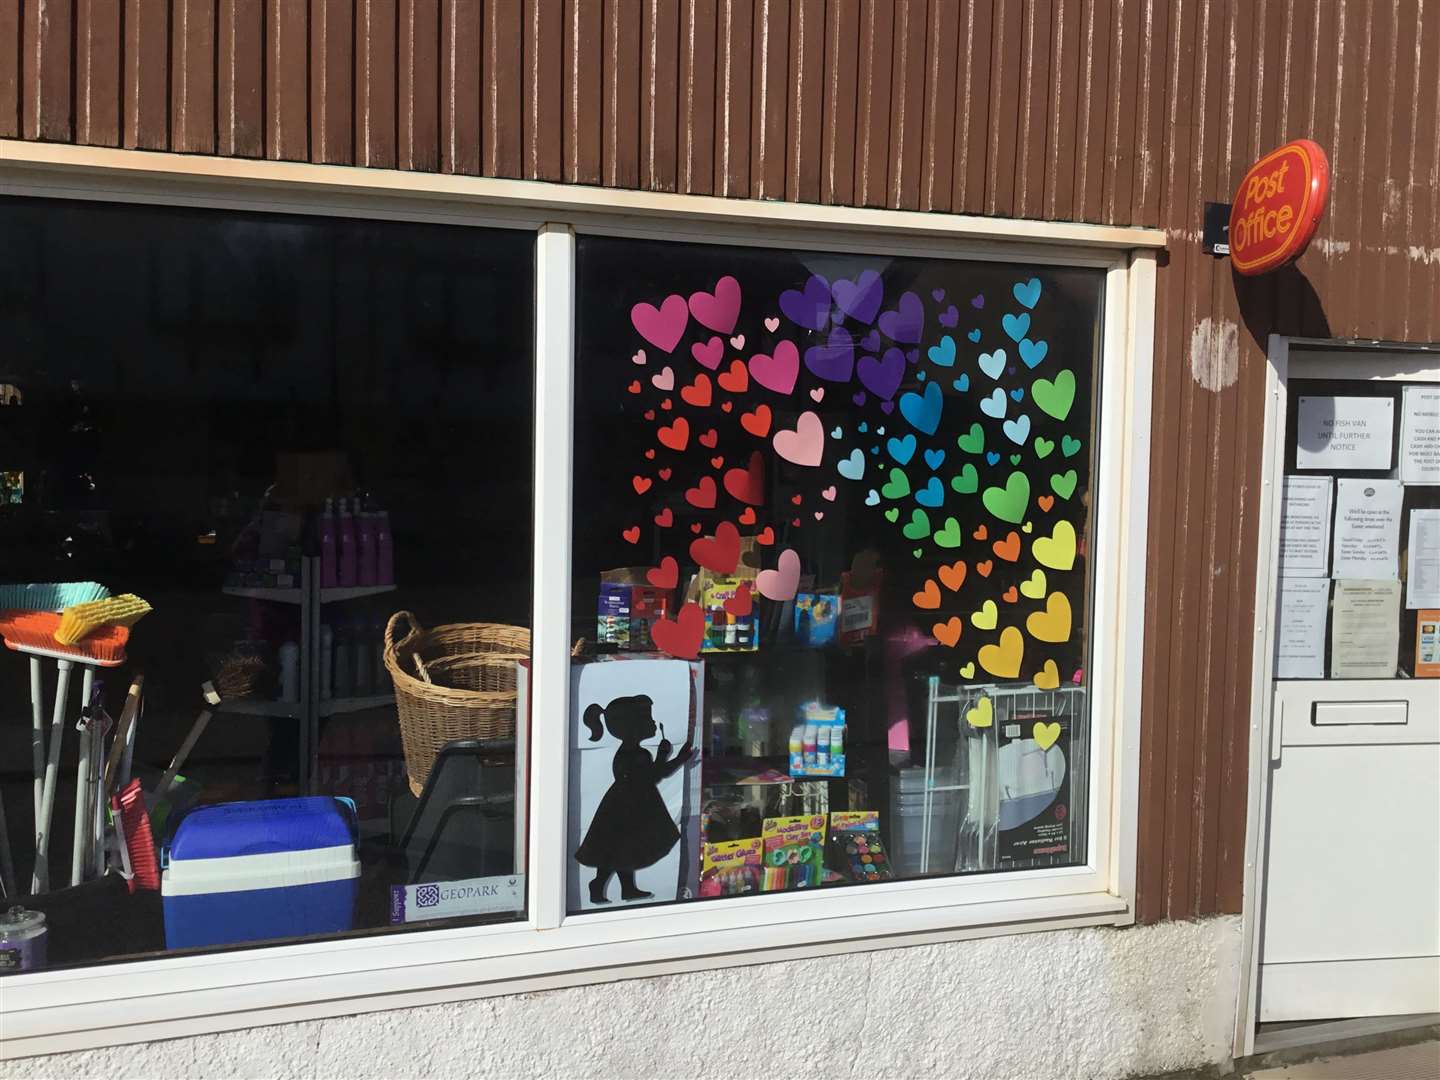 Kinlochbervie residents help create this uplifting display of hearts in the window of their local post office and garage.